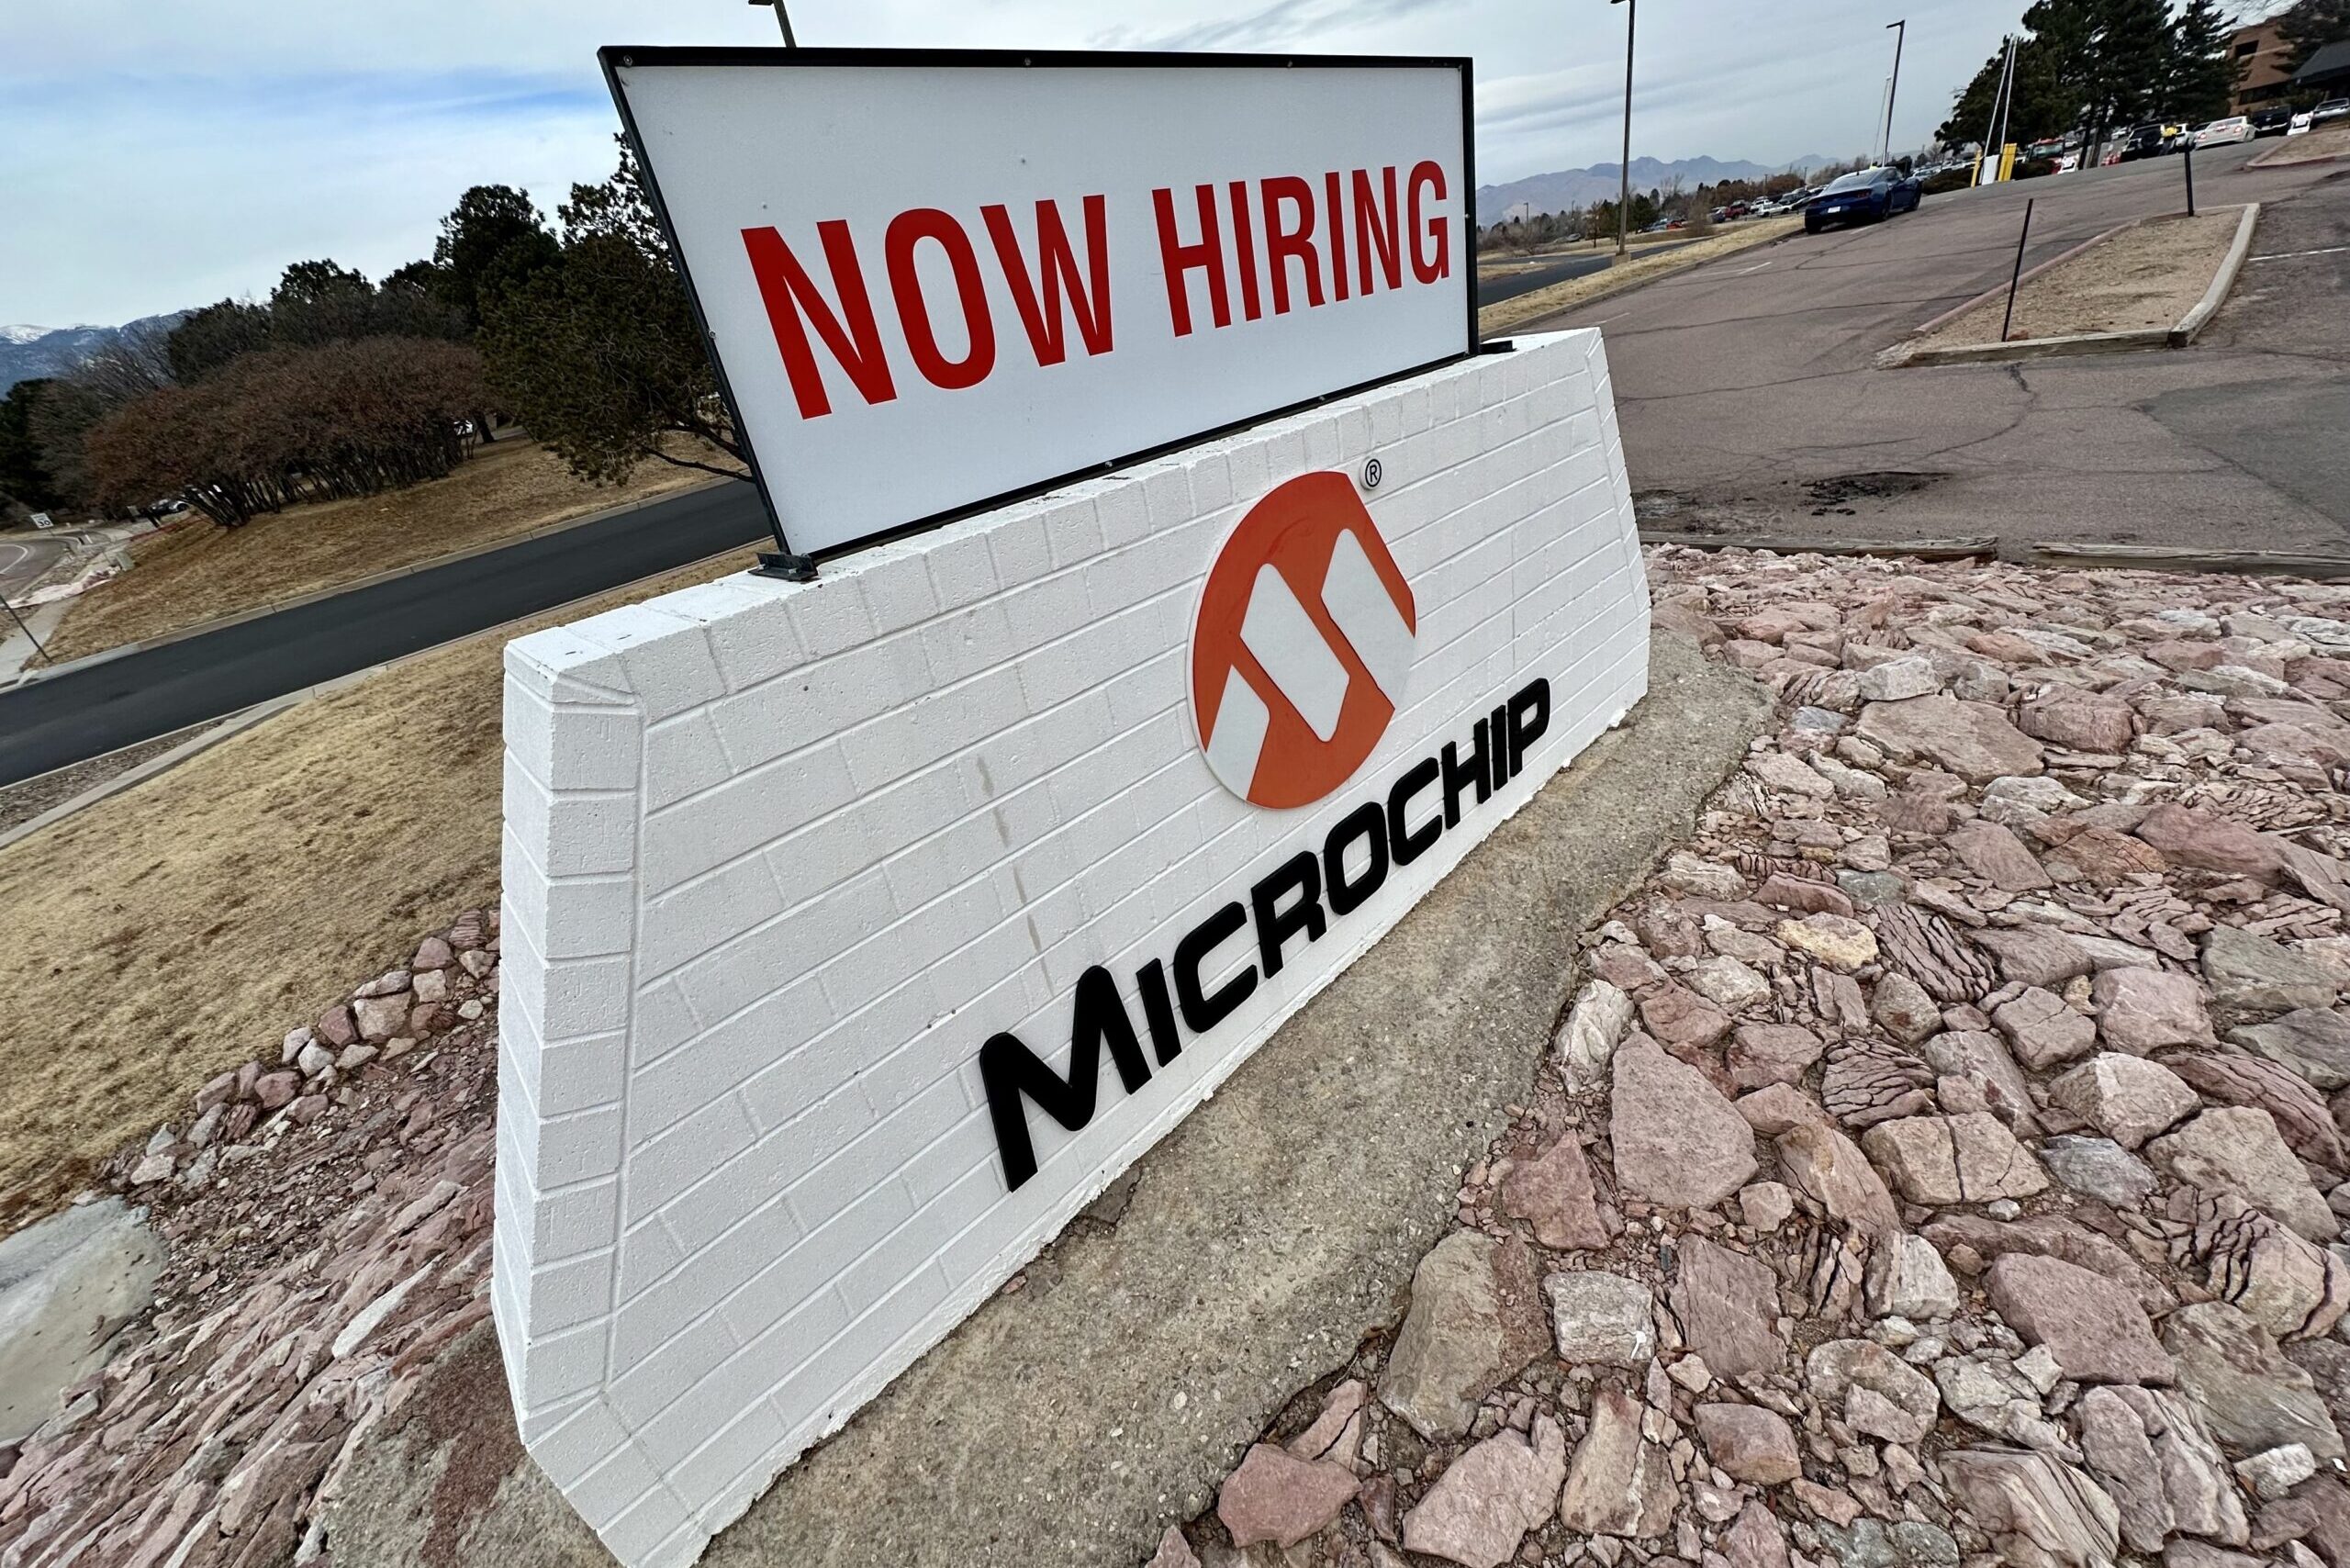 The Microchip sign outside of the Colorado Springs facility